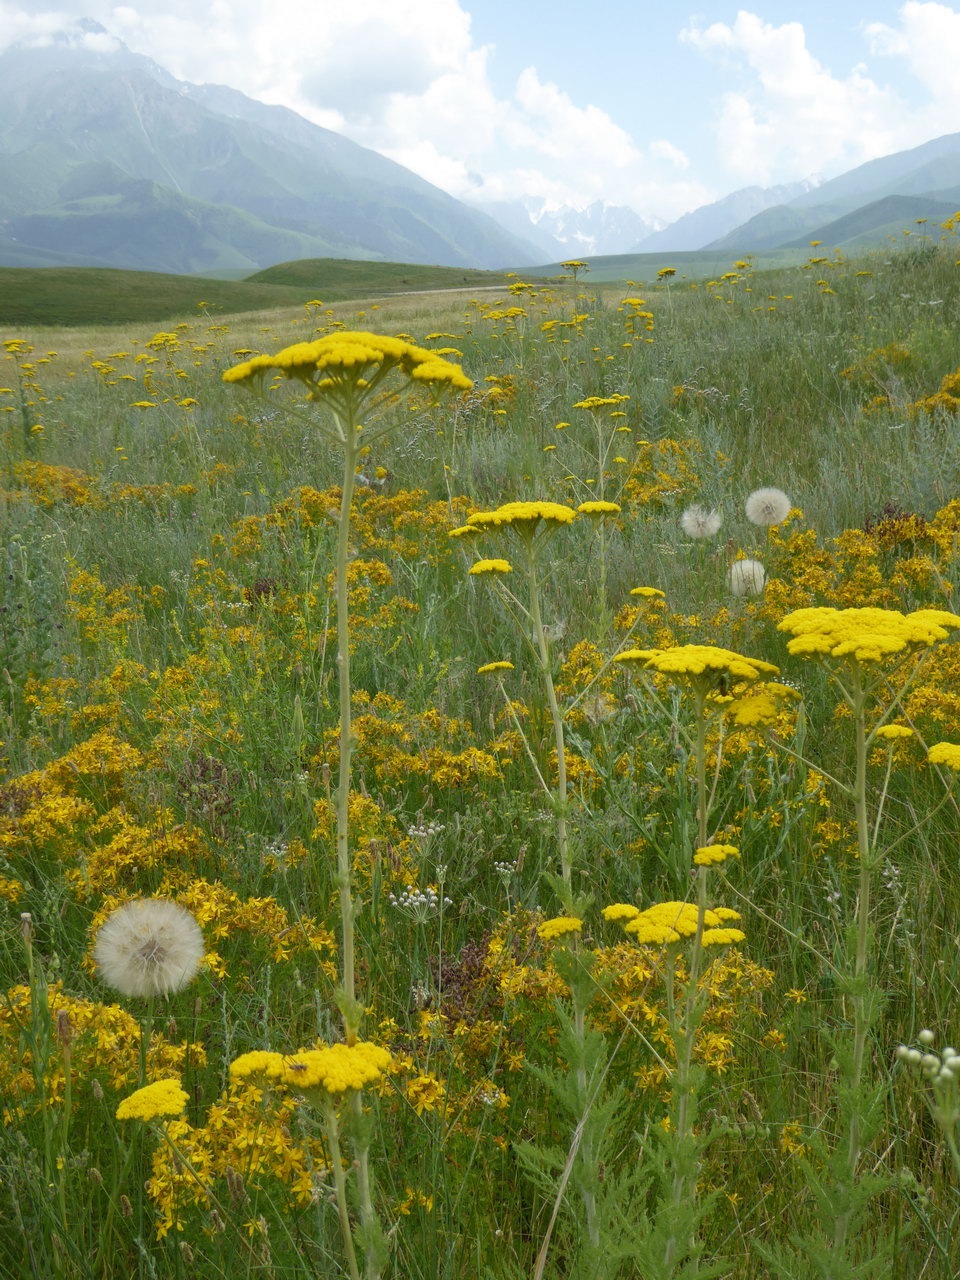 A meadow of different yellow flowers with mountains in the background